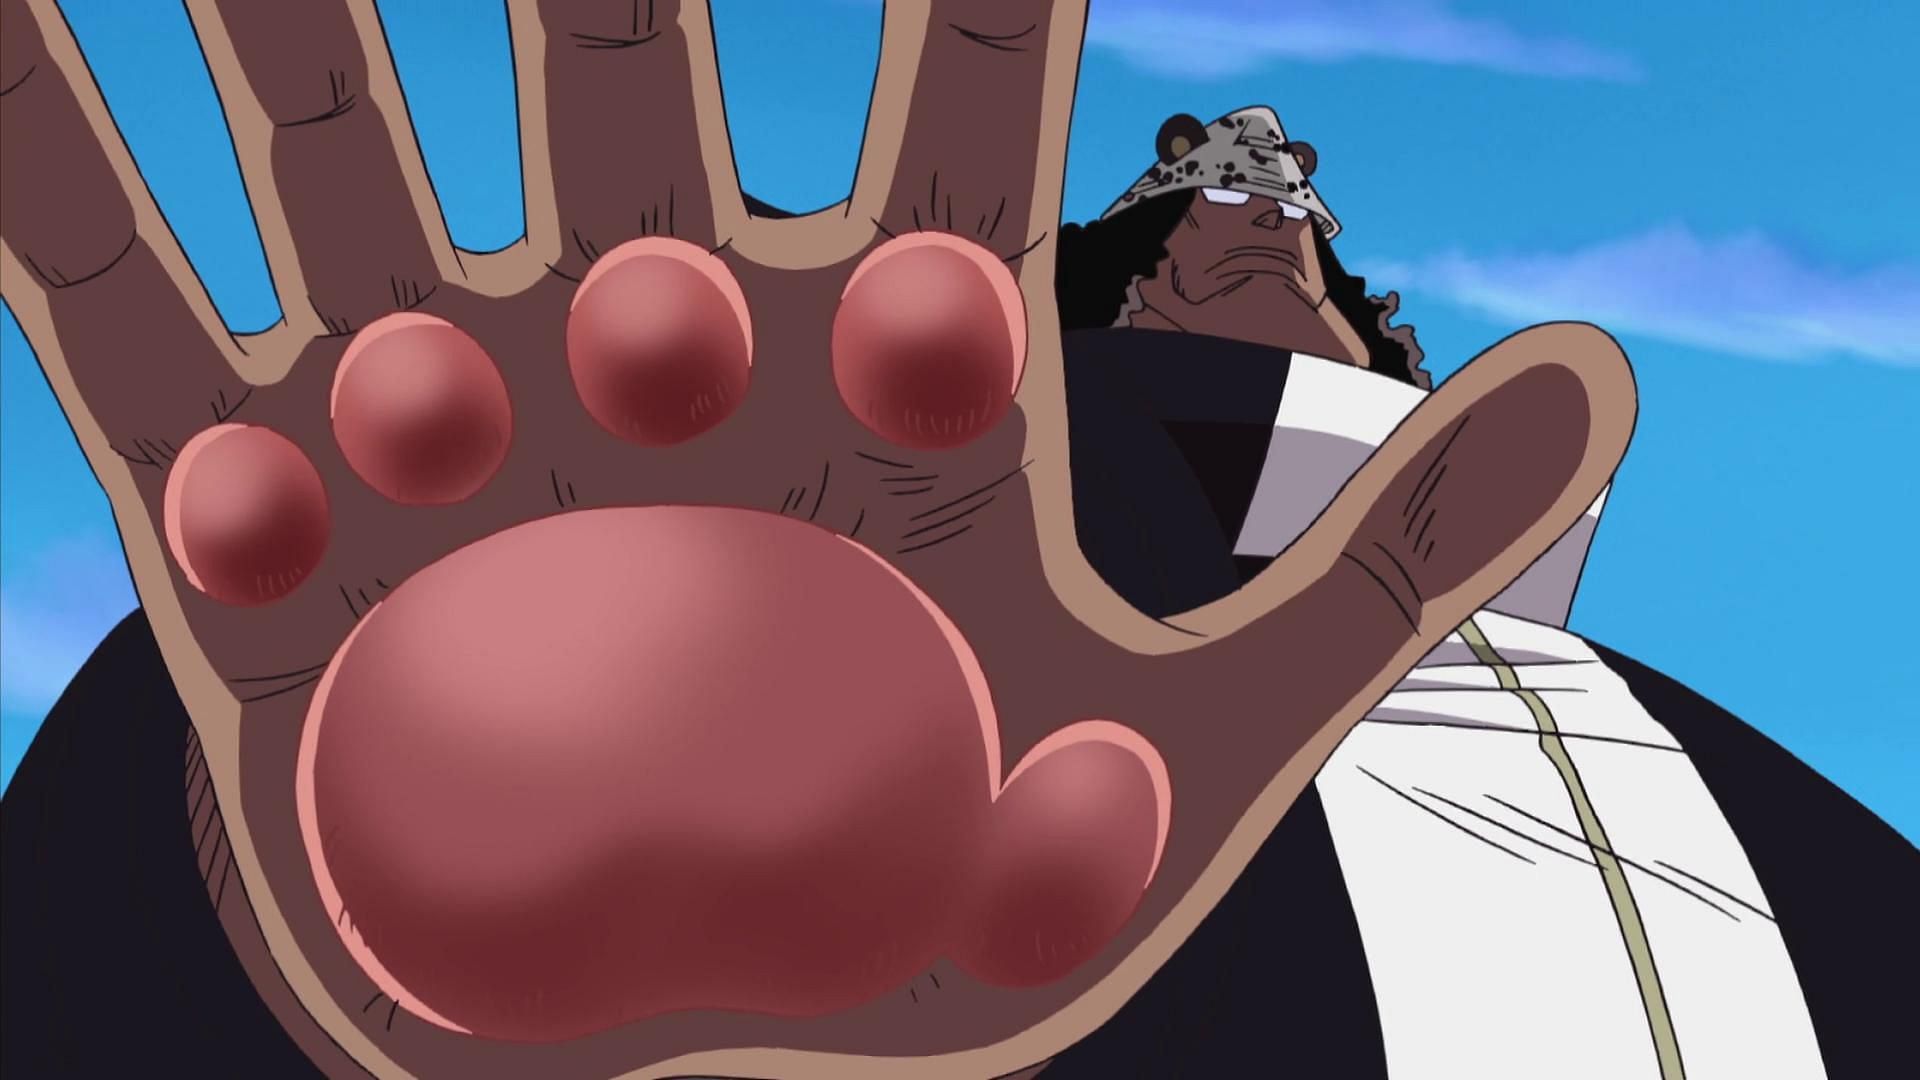 The Paw-Paw Fruit as seen in One Piece (Image via Toei Animation)